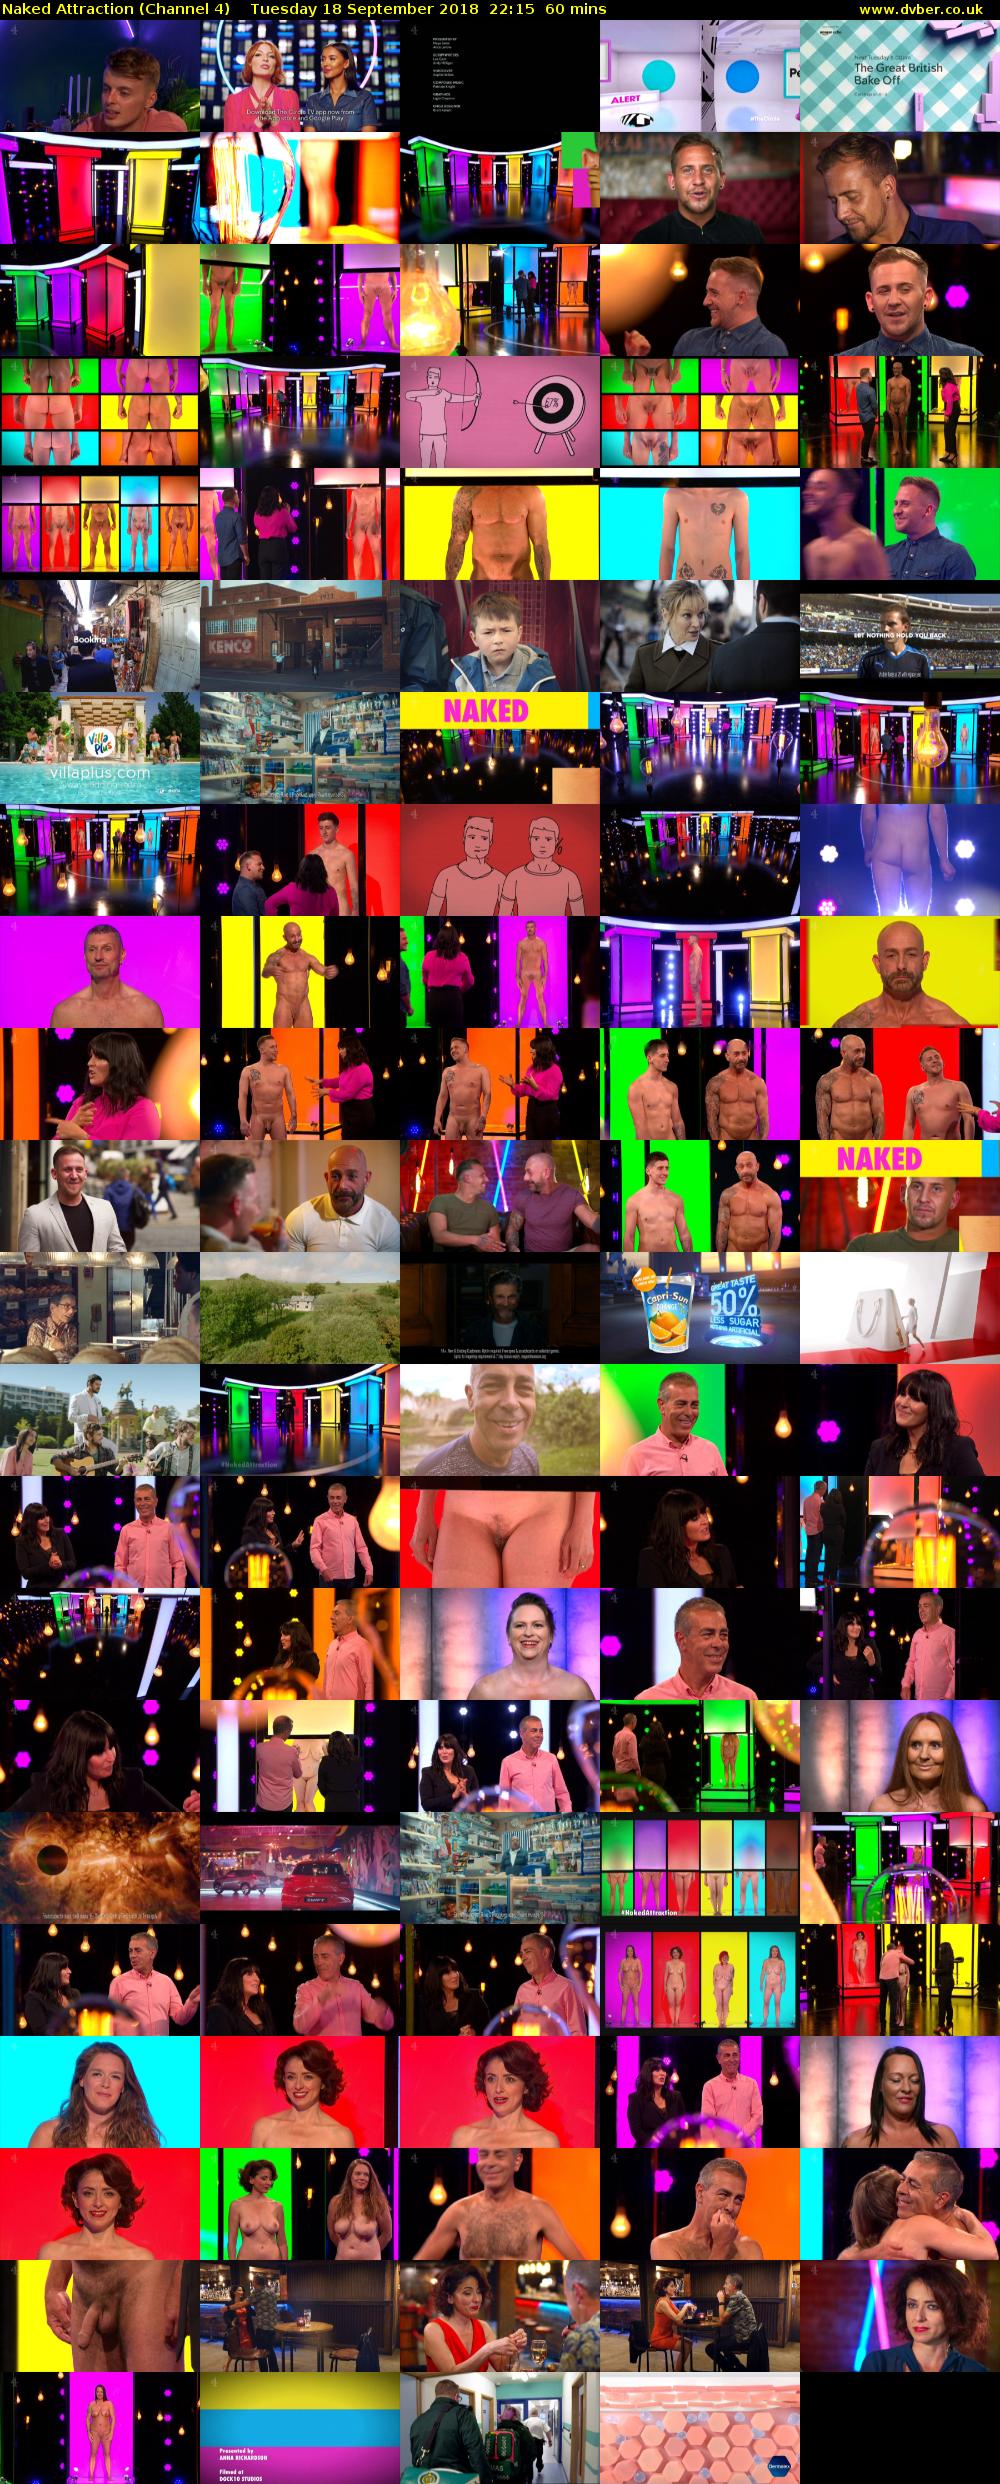 Naked Attraction (Channel 4) Tuesday 18 September 2018 22:15 - 23:15